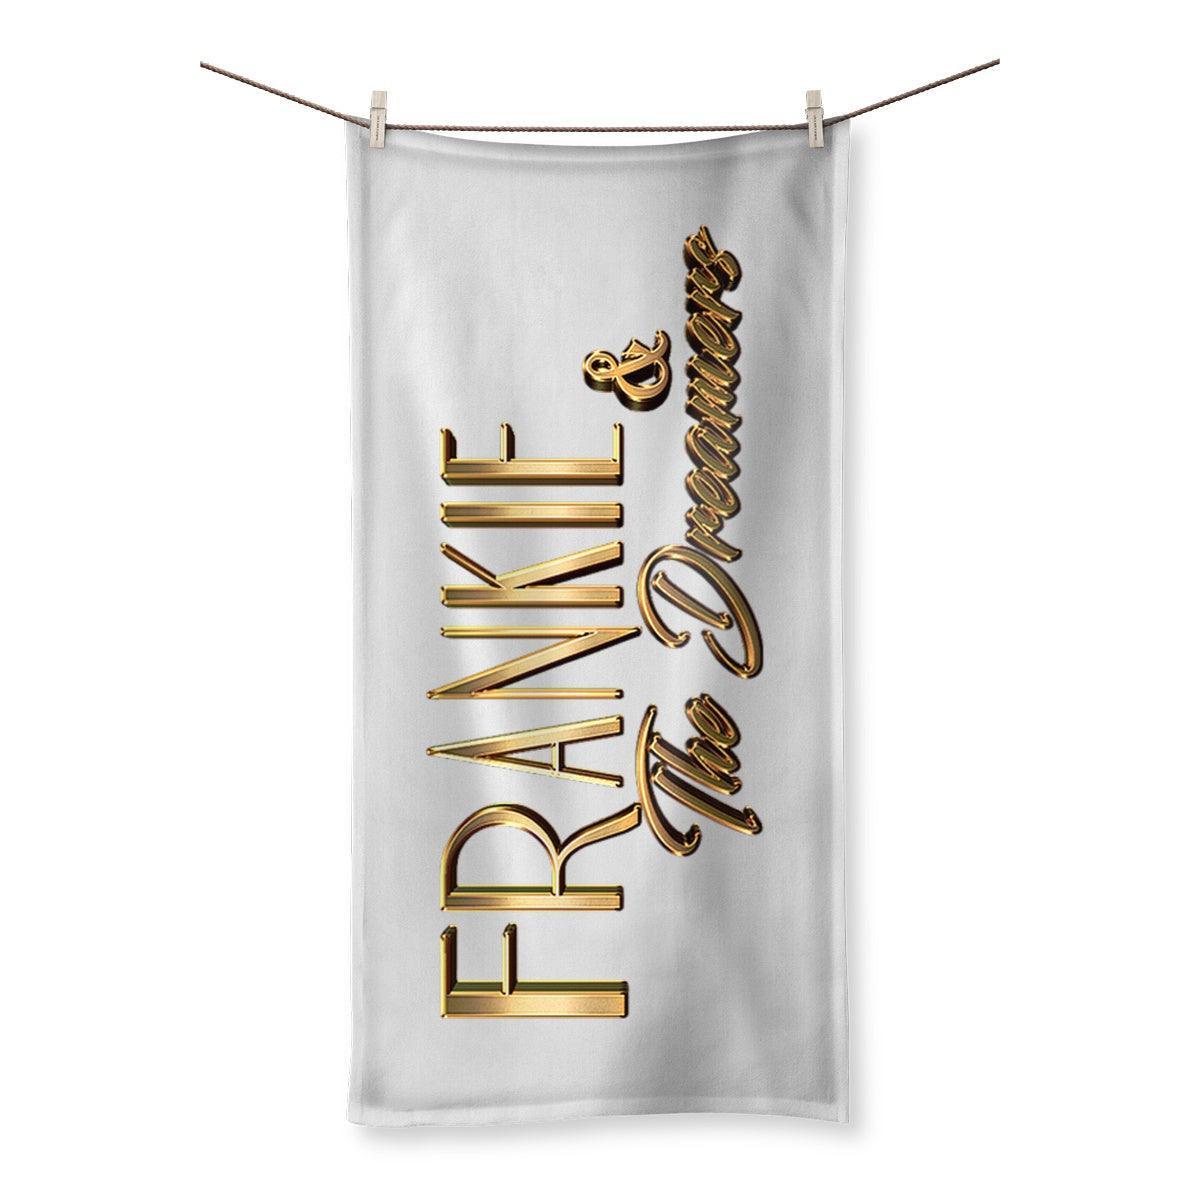 Frankie And The Dreamers Towel | Homeware 31.5"x63.0"